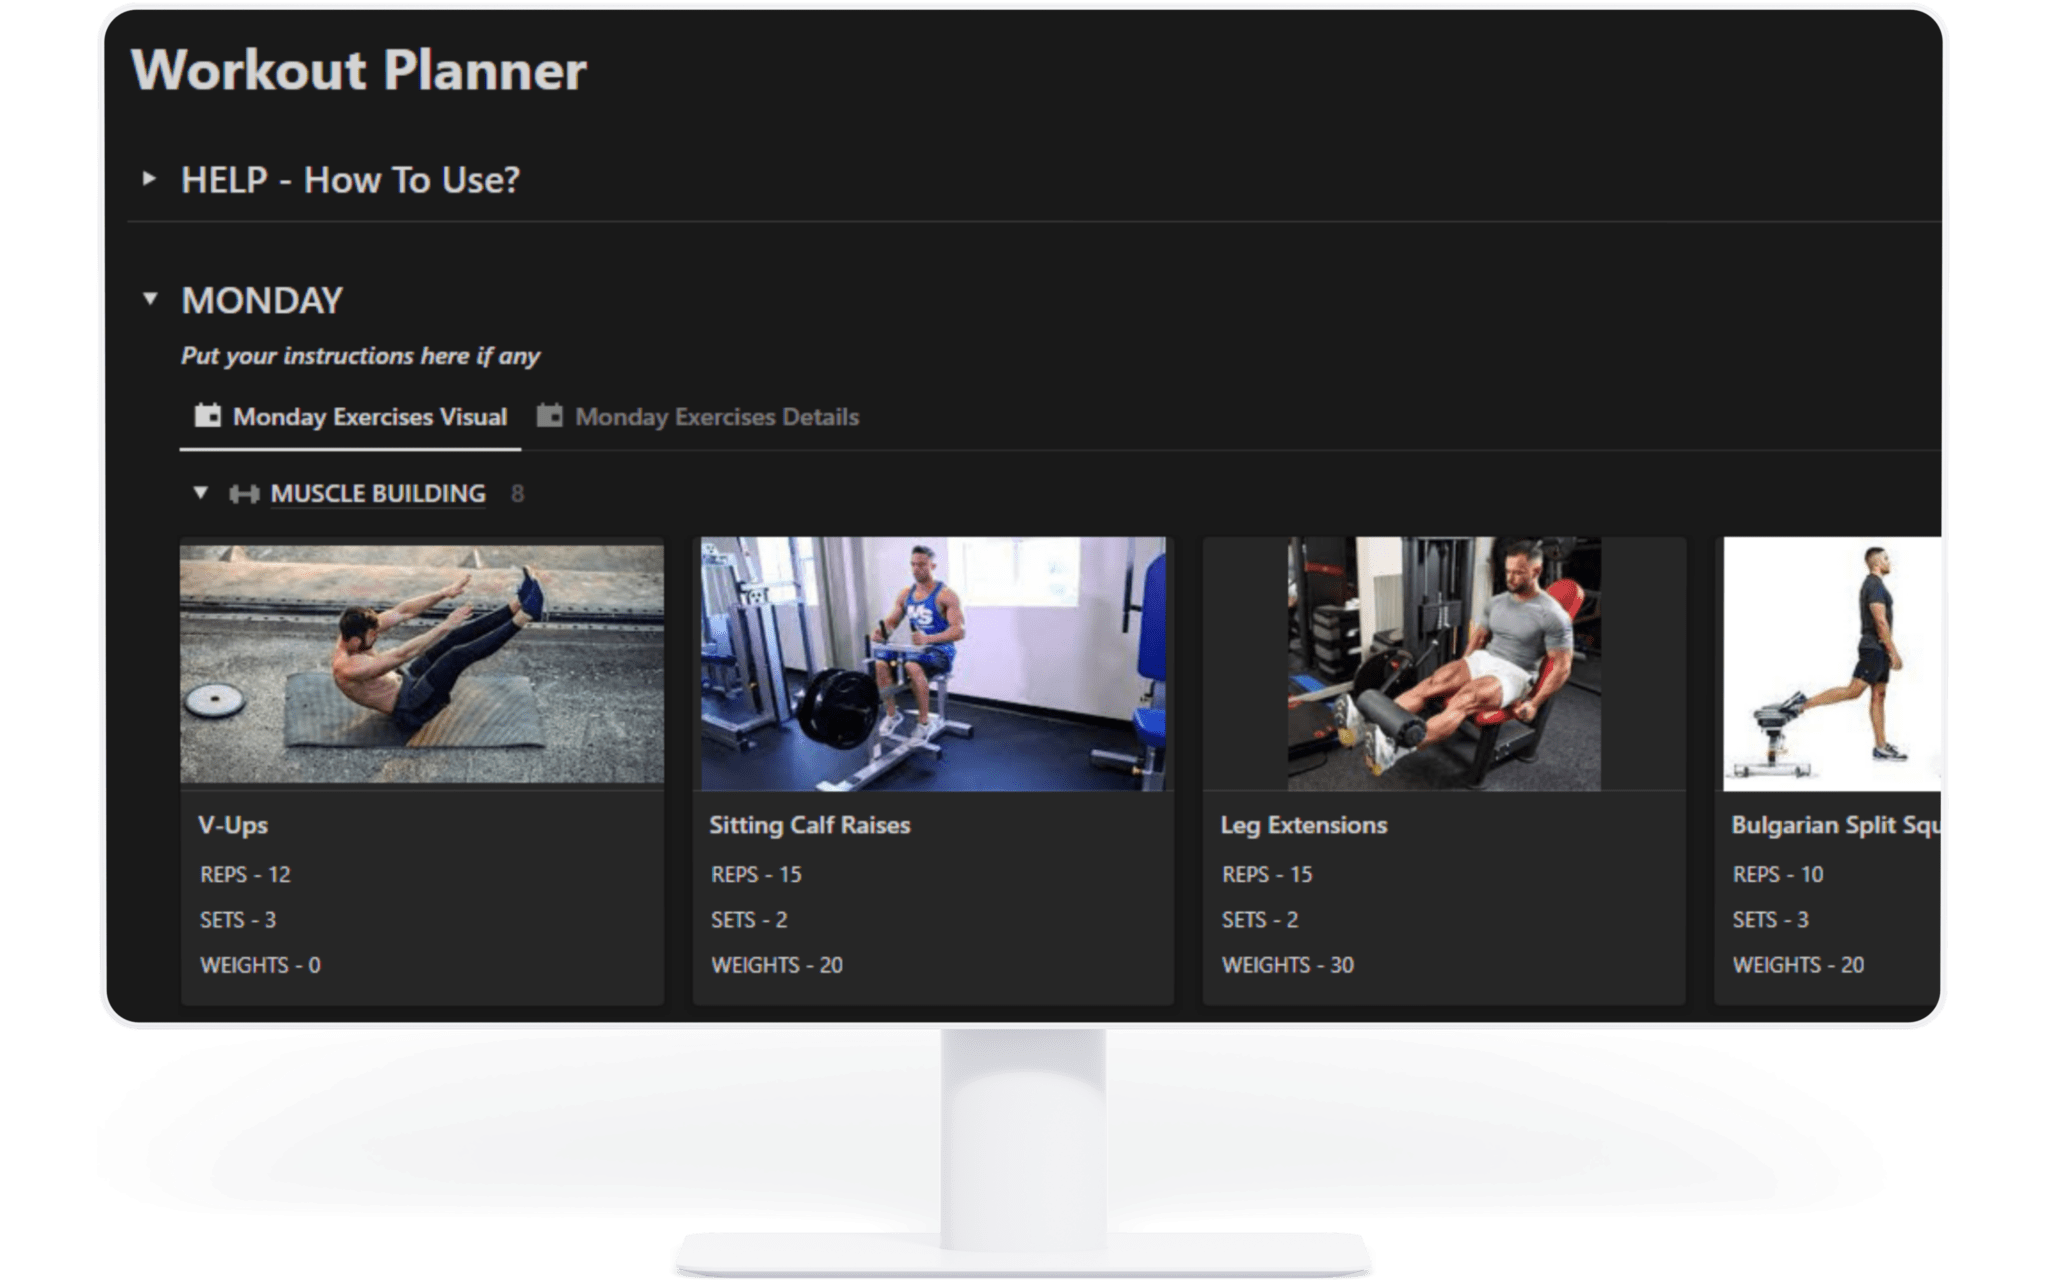 Workout Planner, dive into the world of fitness and revolutionize your fitness routine. Organize your workouts by exercise types such as muscle building, cardio, and more, with detailed visual galleries for each day.